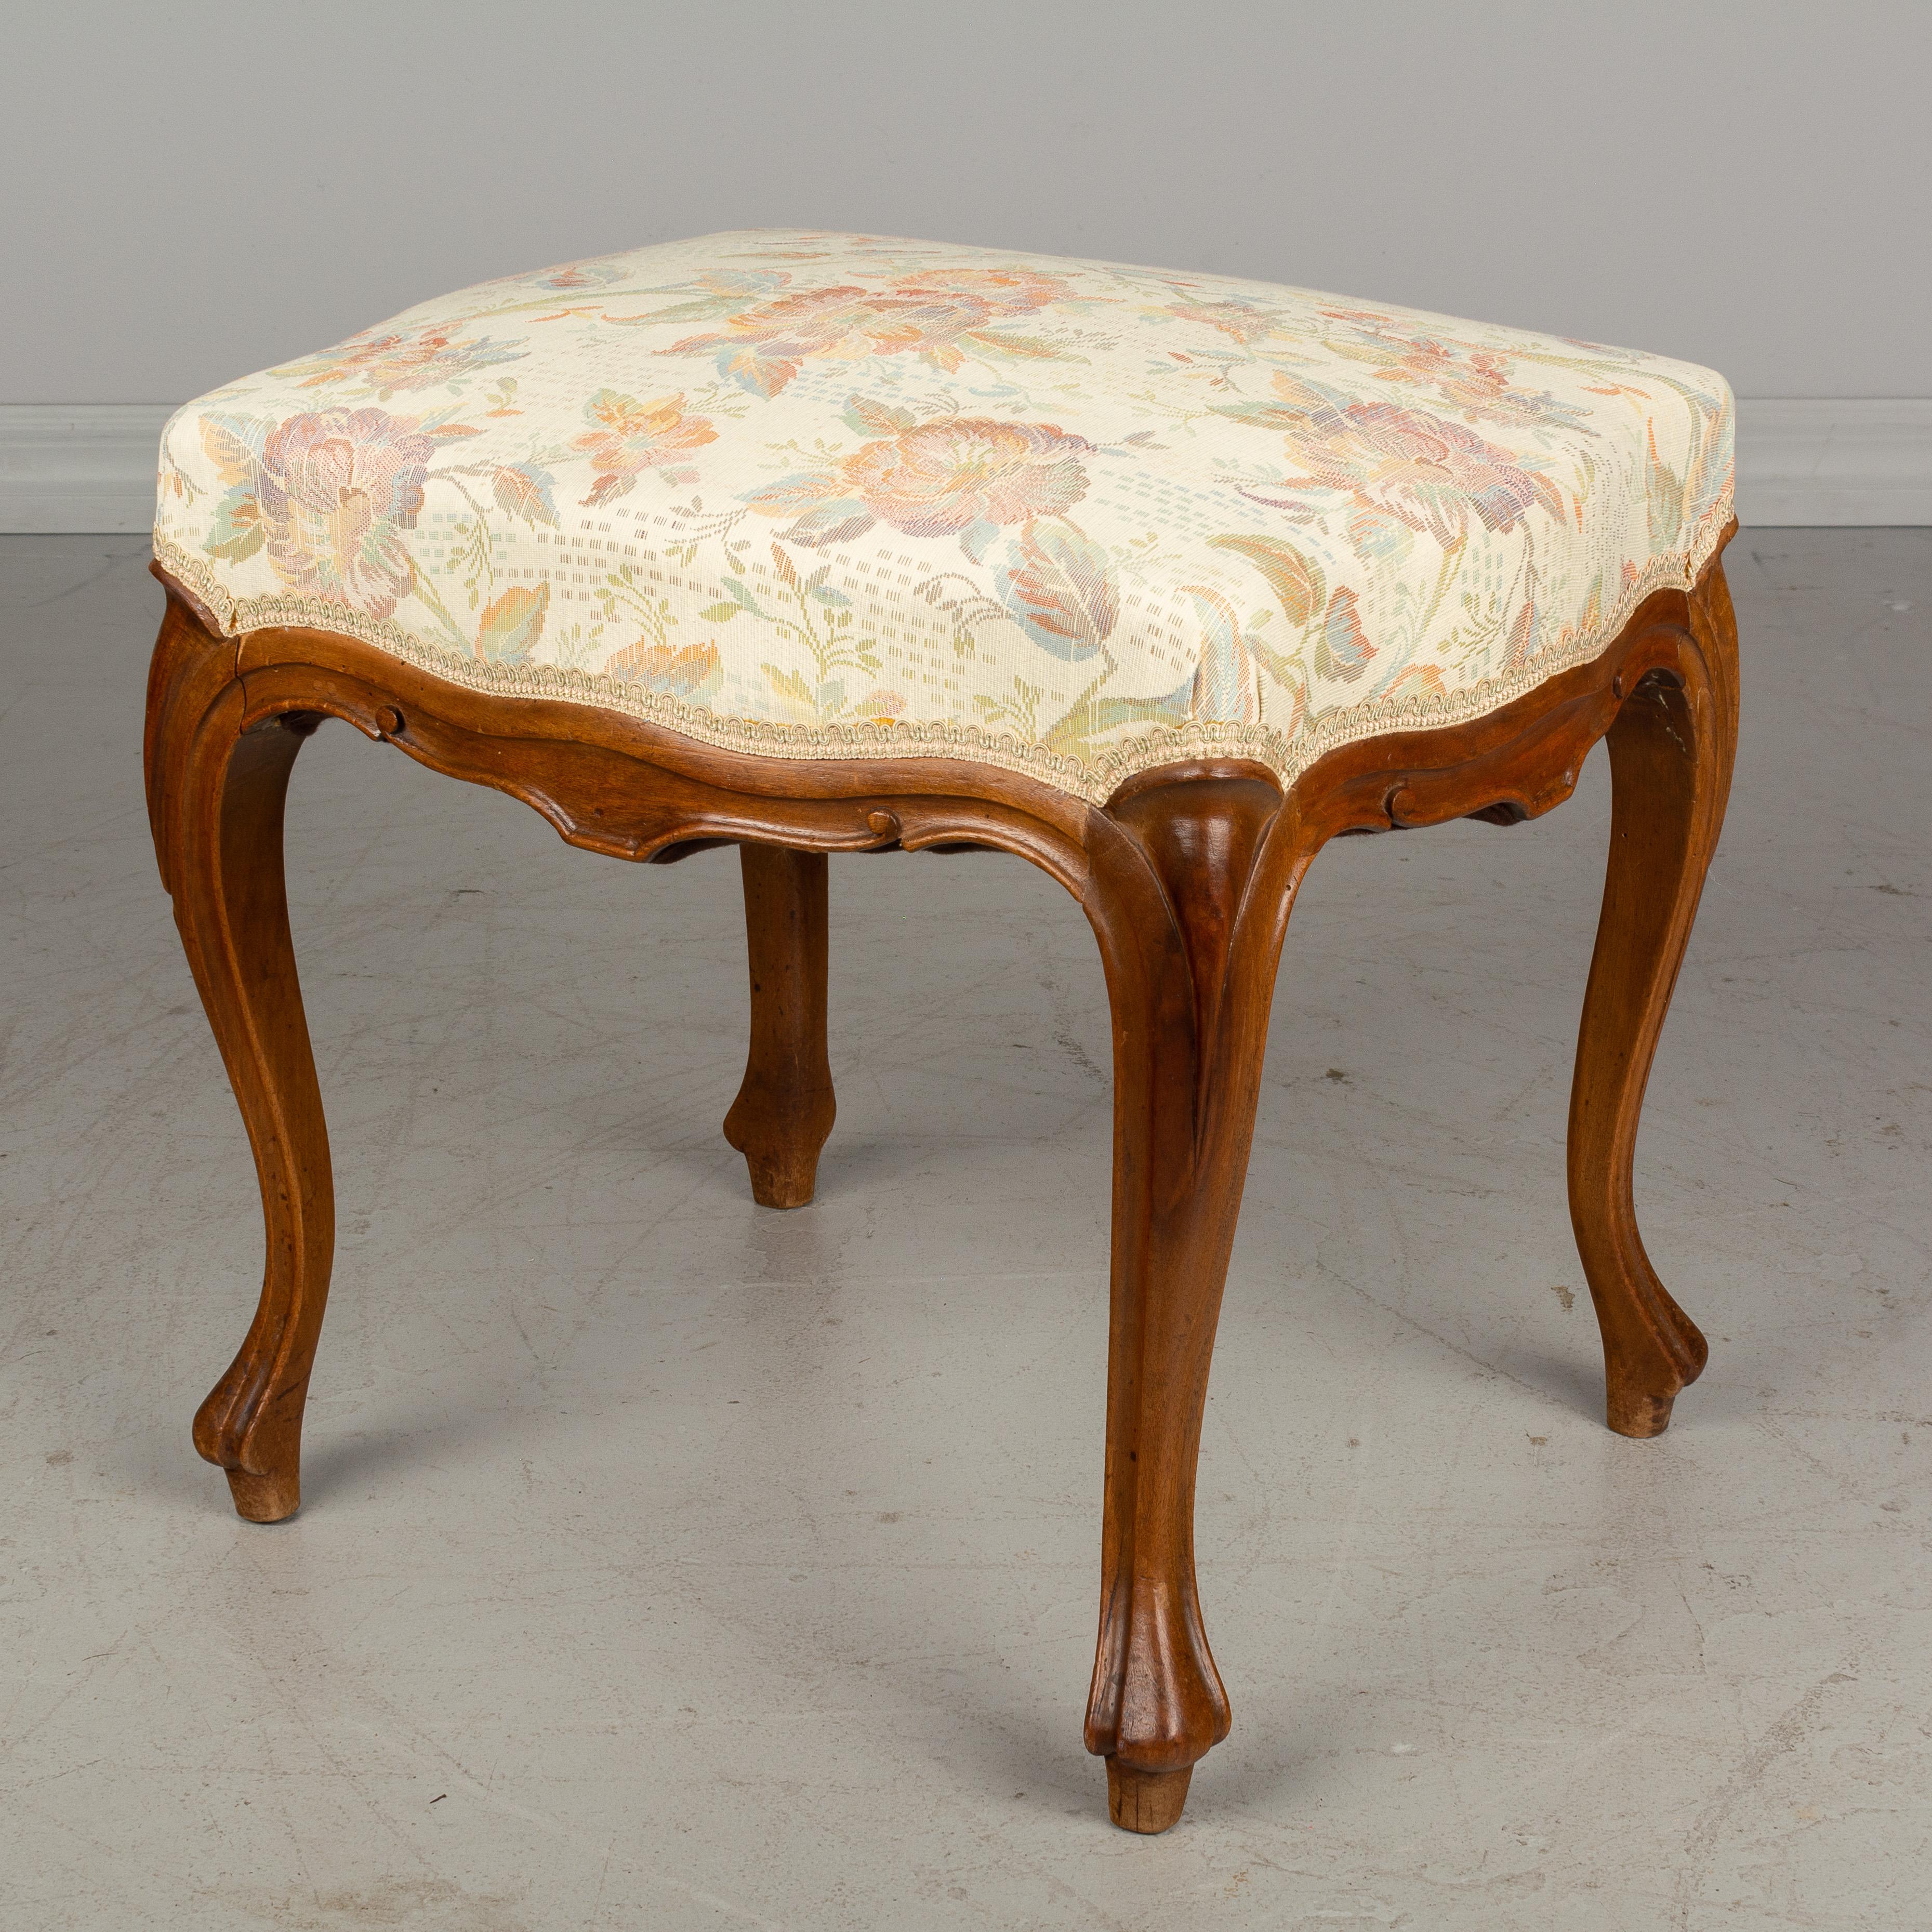 An early 20th century French Louis XV style foot stool or bench with carved walnut frame and upholstered seat. Floral woven tapestry style fabric is as found and in good condition.